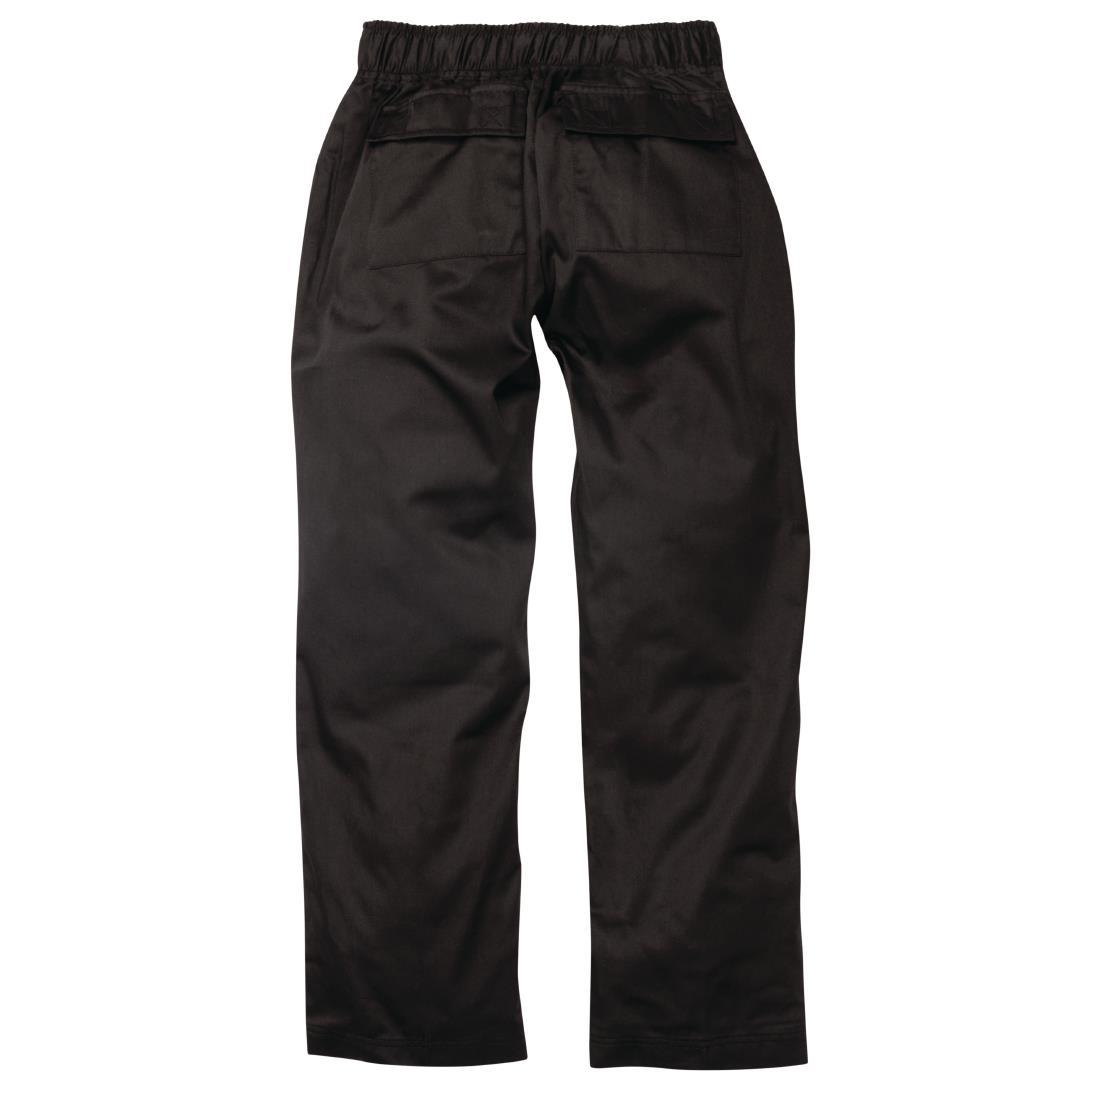 Chef Works Womens Executive Chef Trousers Black M - A431-M  - 2